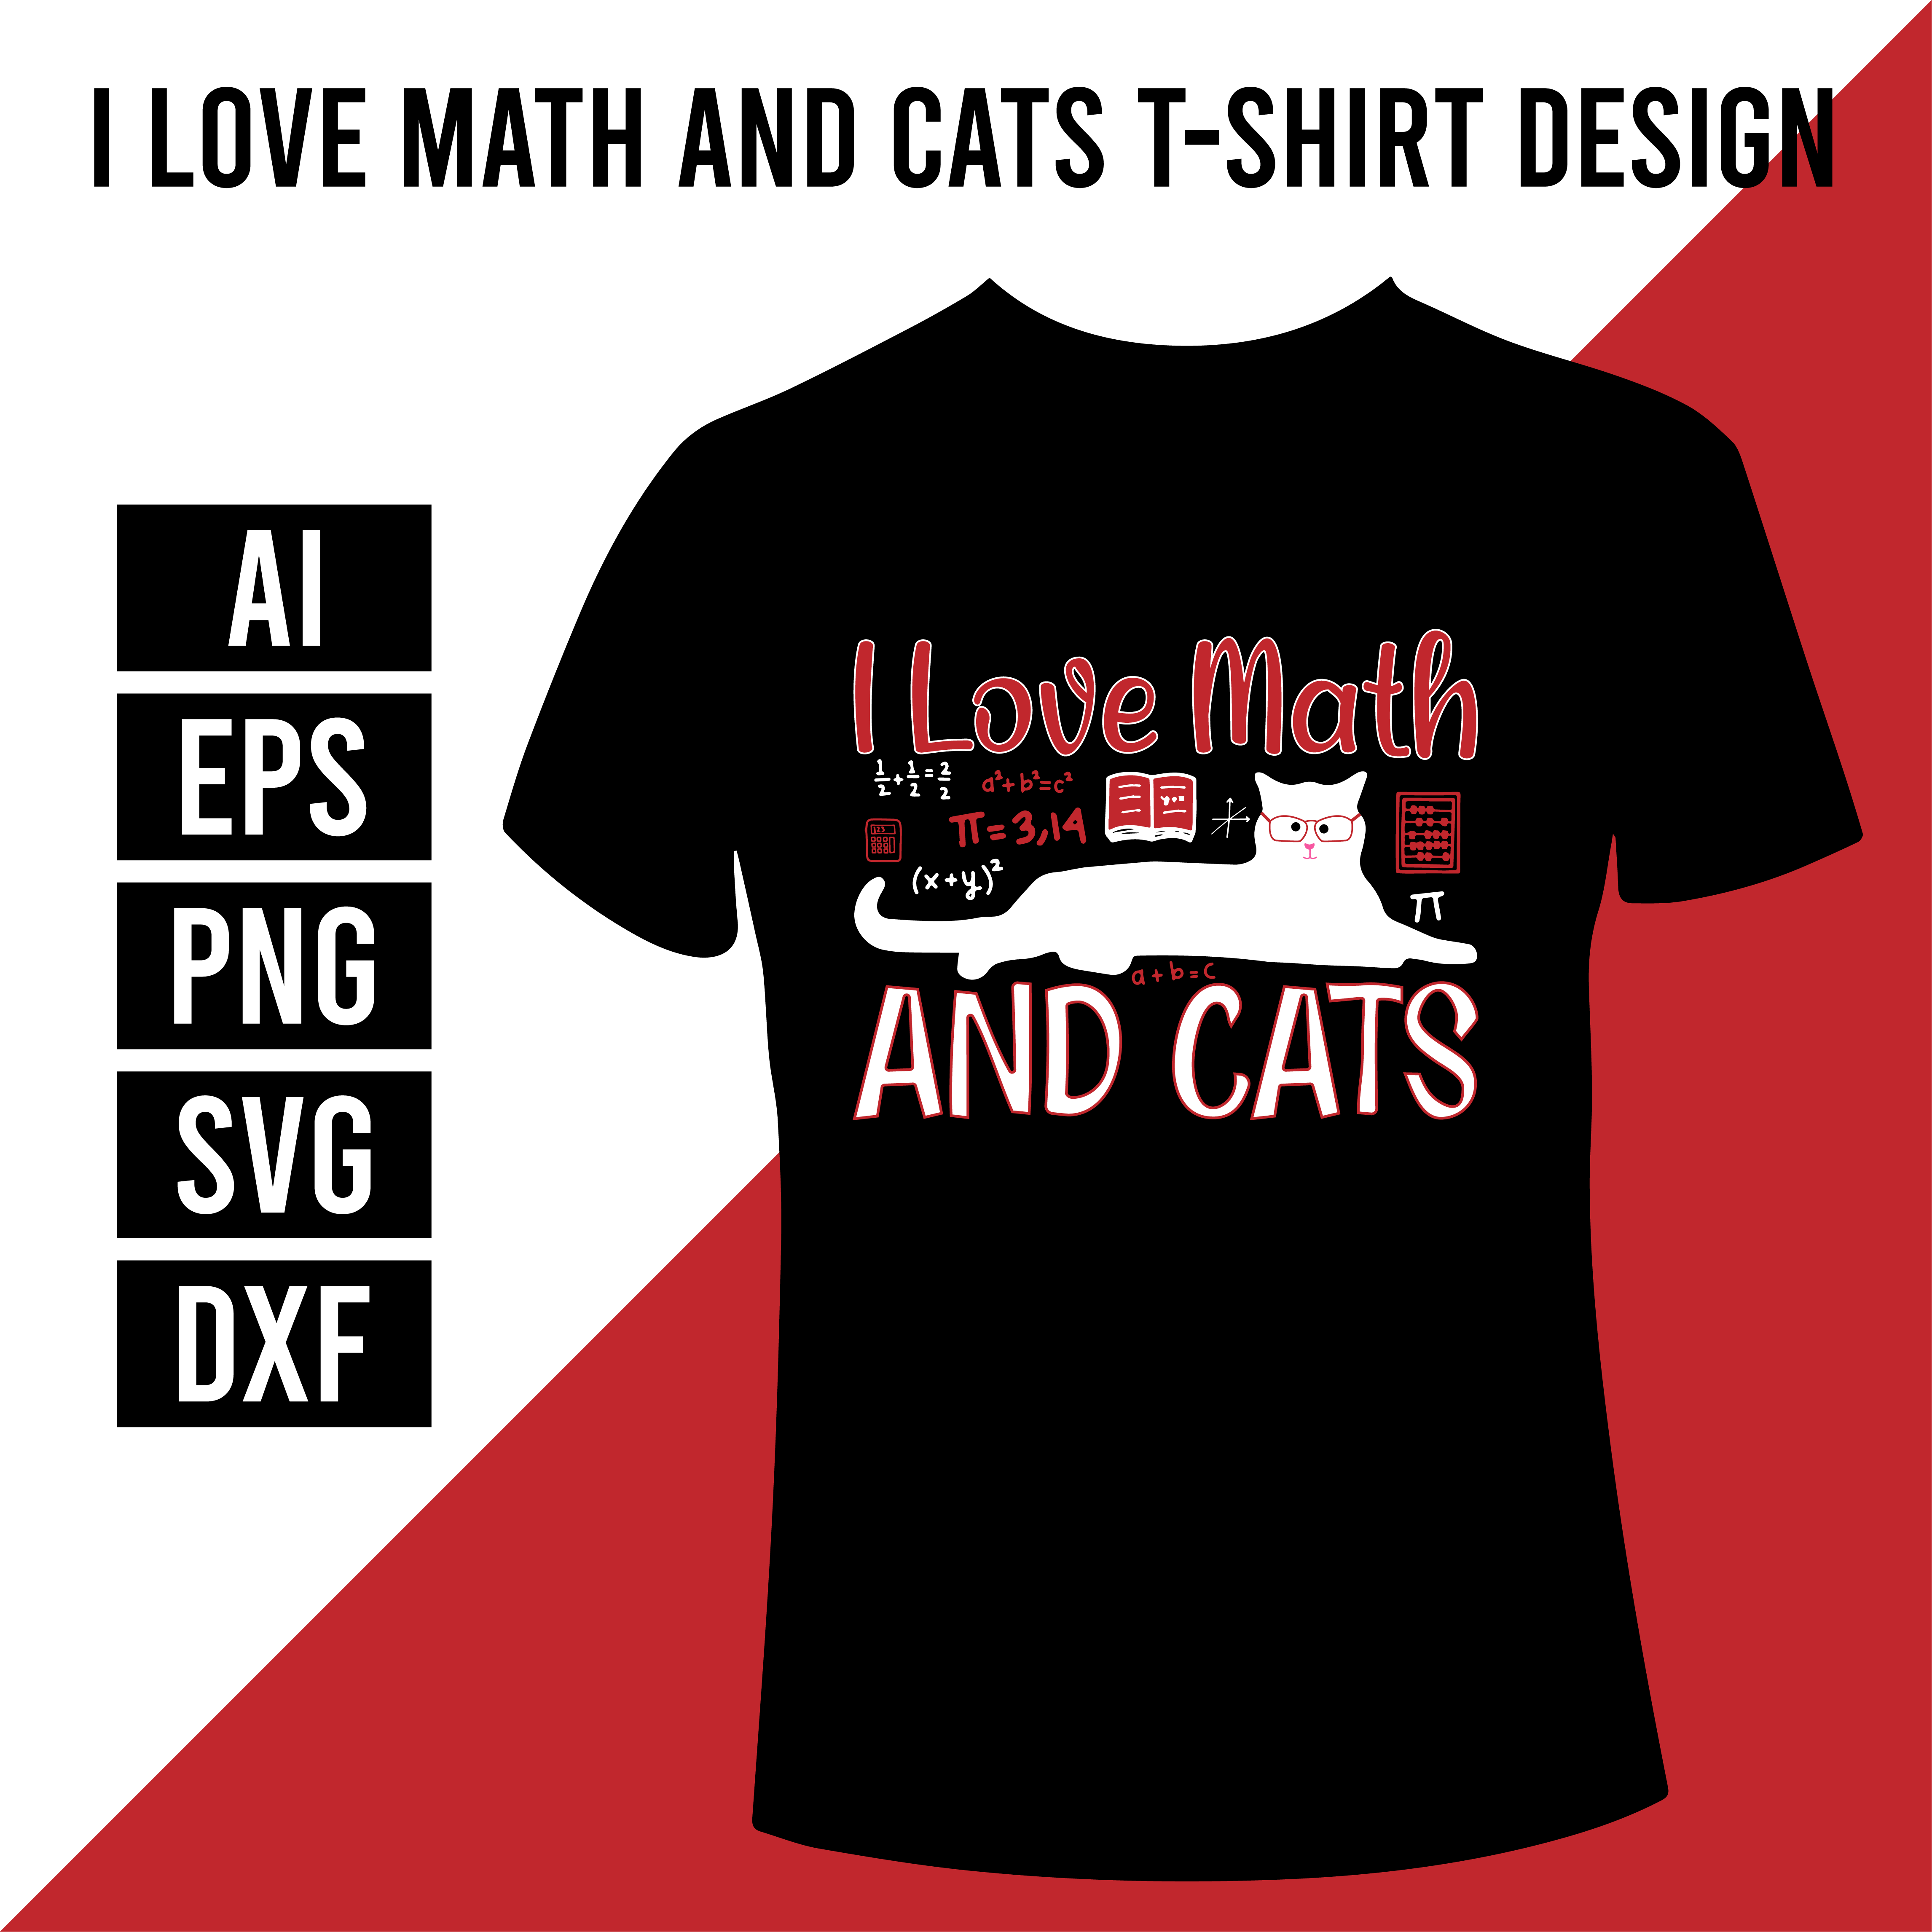 I Love Math And Cats T-Shirt Design main cover.